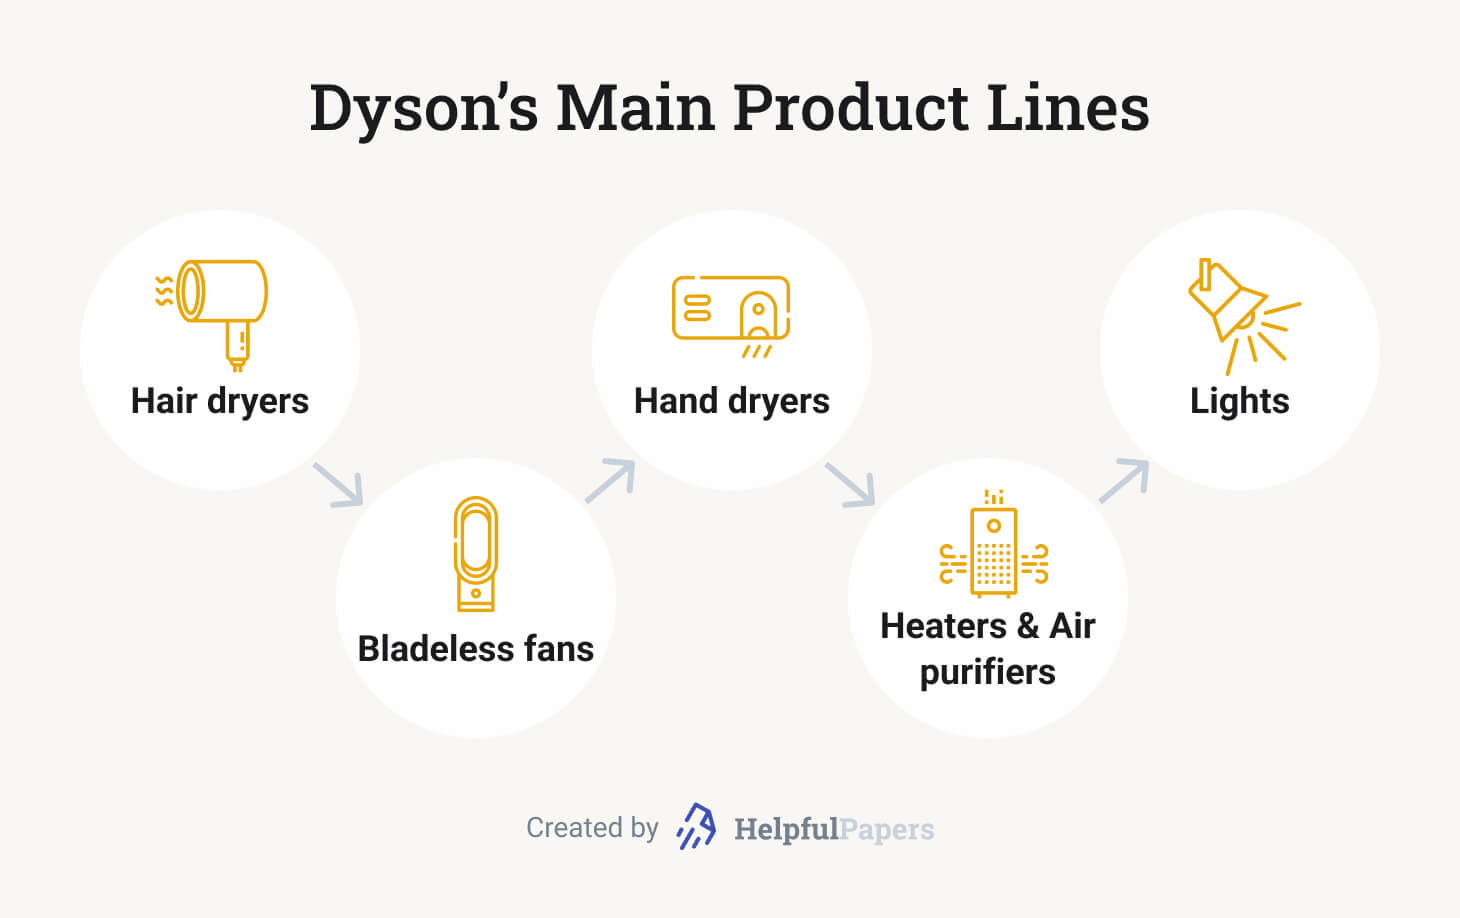 The picture shows the main product lines of Dyson.